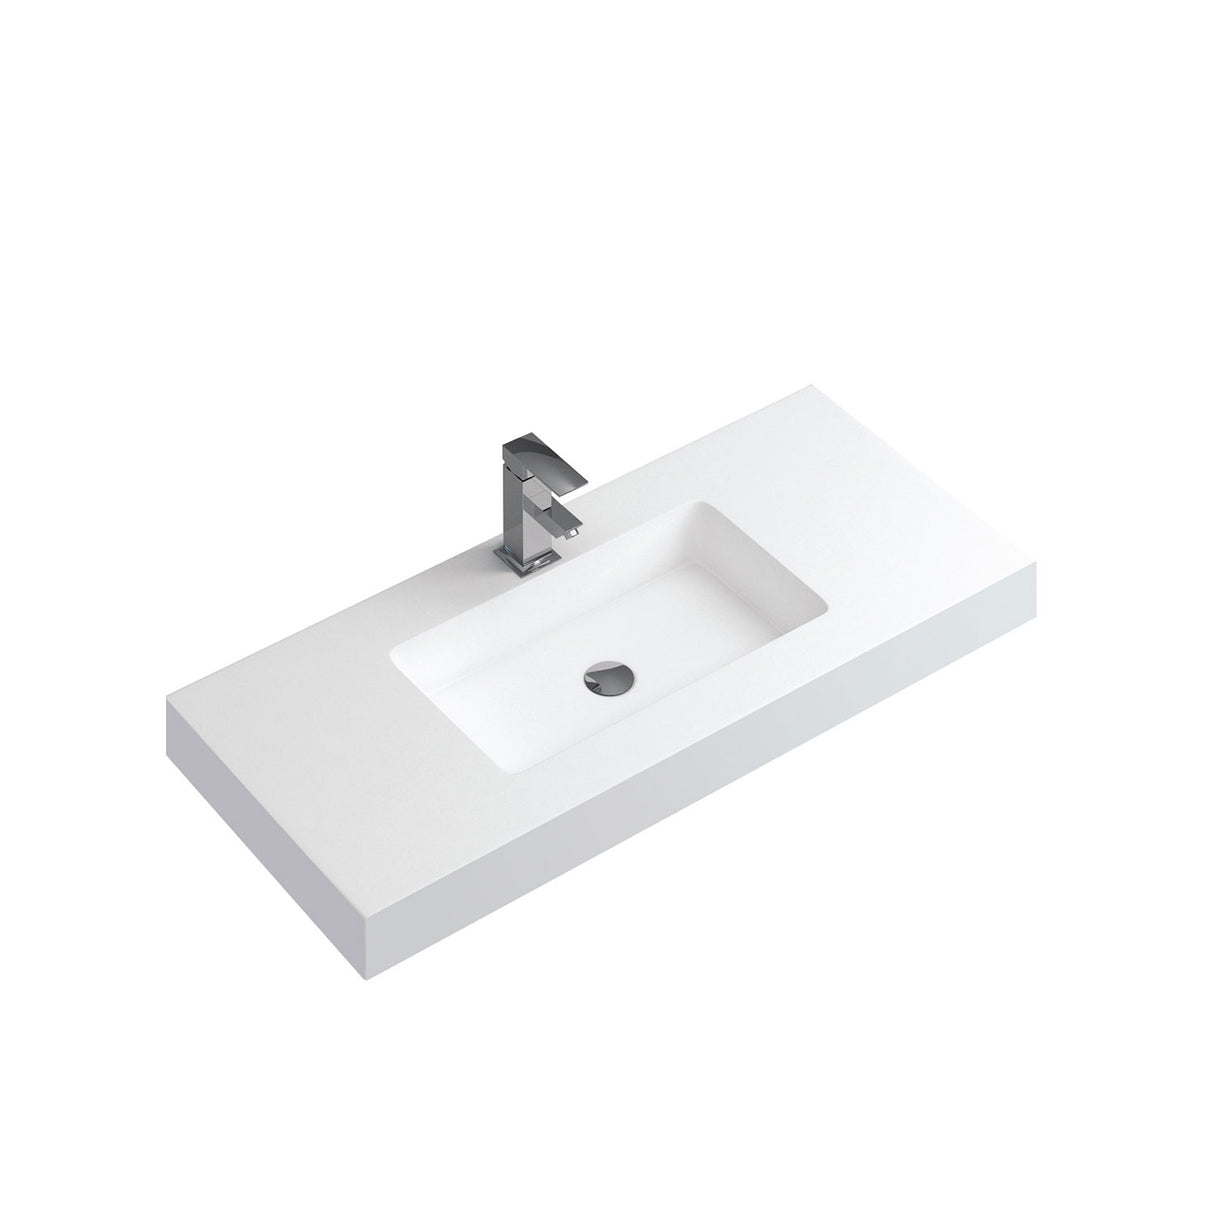 DAX Bayside Solid Surface Single Vanity Top Basin, 40", Matte White DAX-BAY401AMB-L